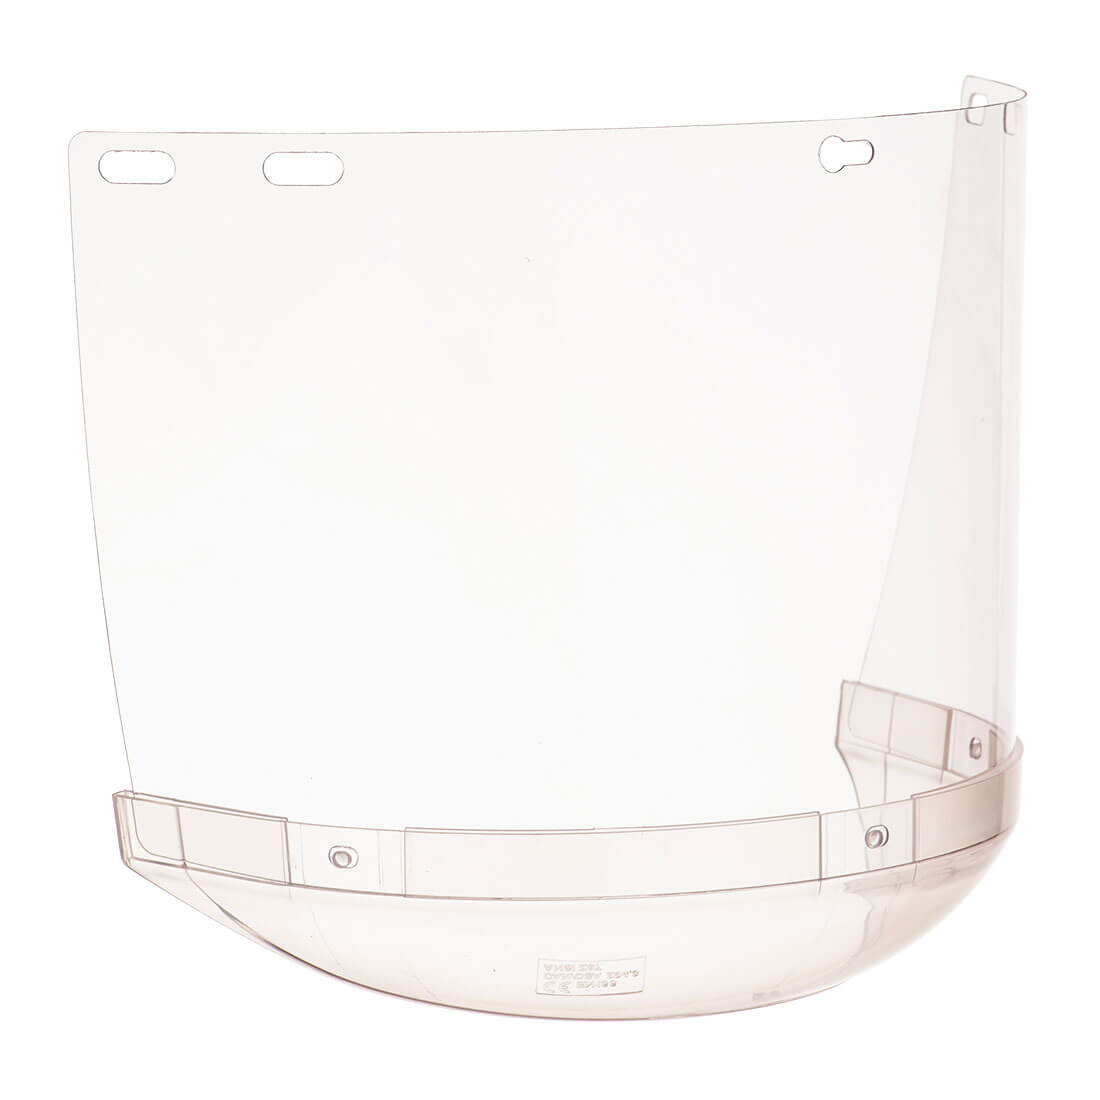 Portwest PS95 - Visor with chin guard